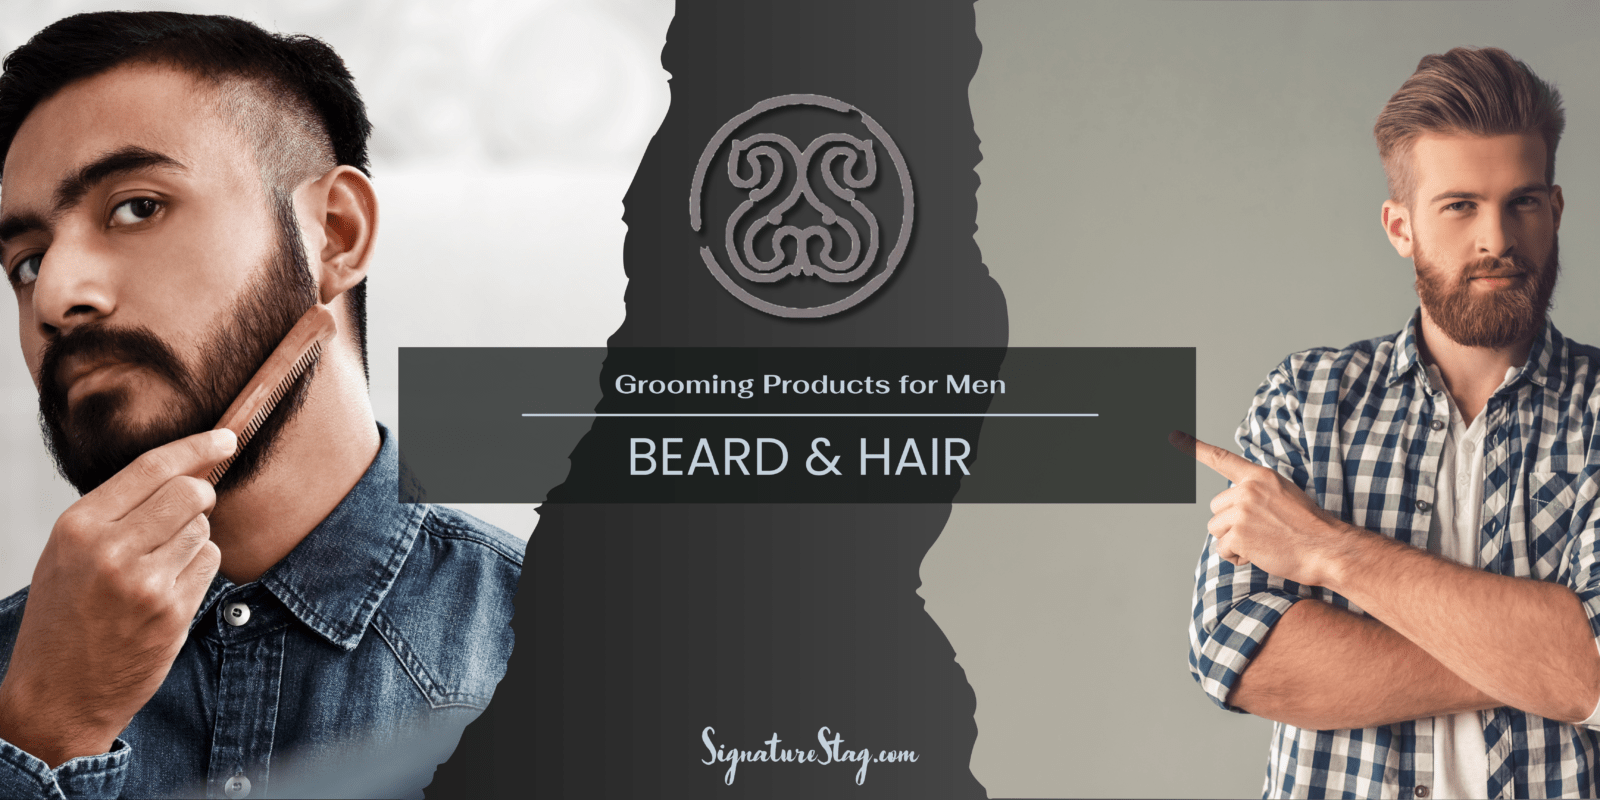 Best Beard and Hair Products for Men in Lubbock and Midland Texas. Grooming product stores for today's man. Shave, beard, body, face and hair products.